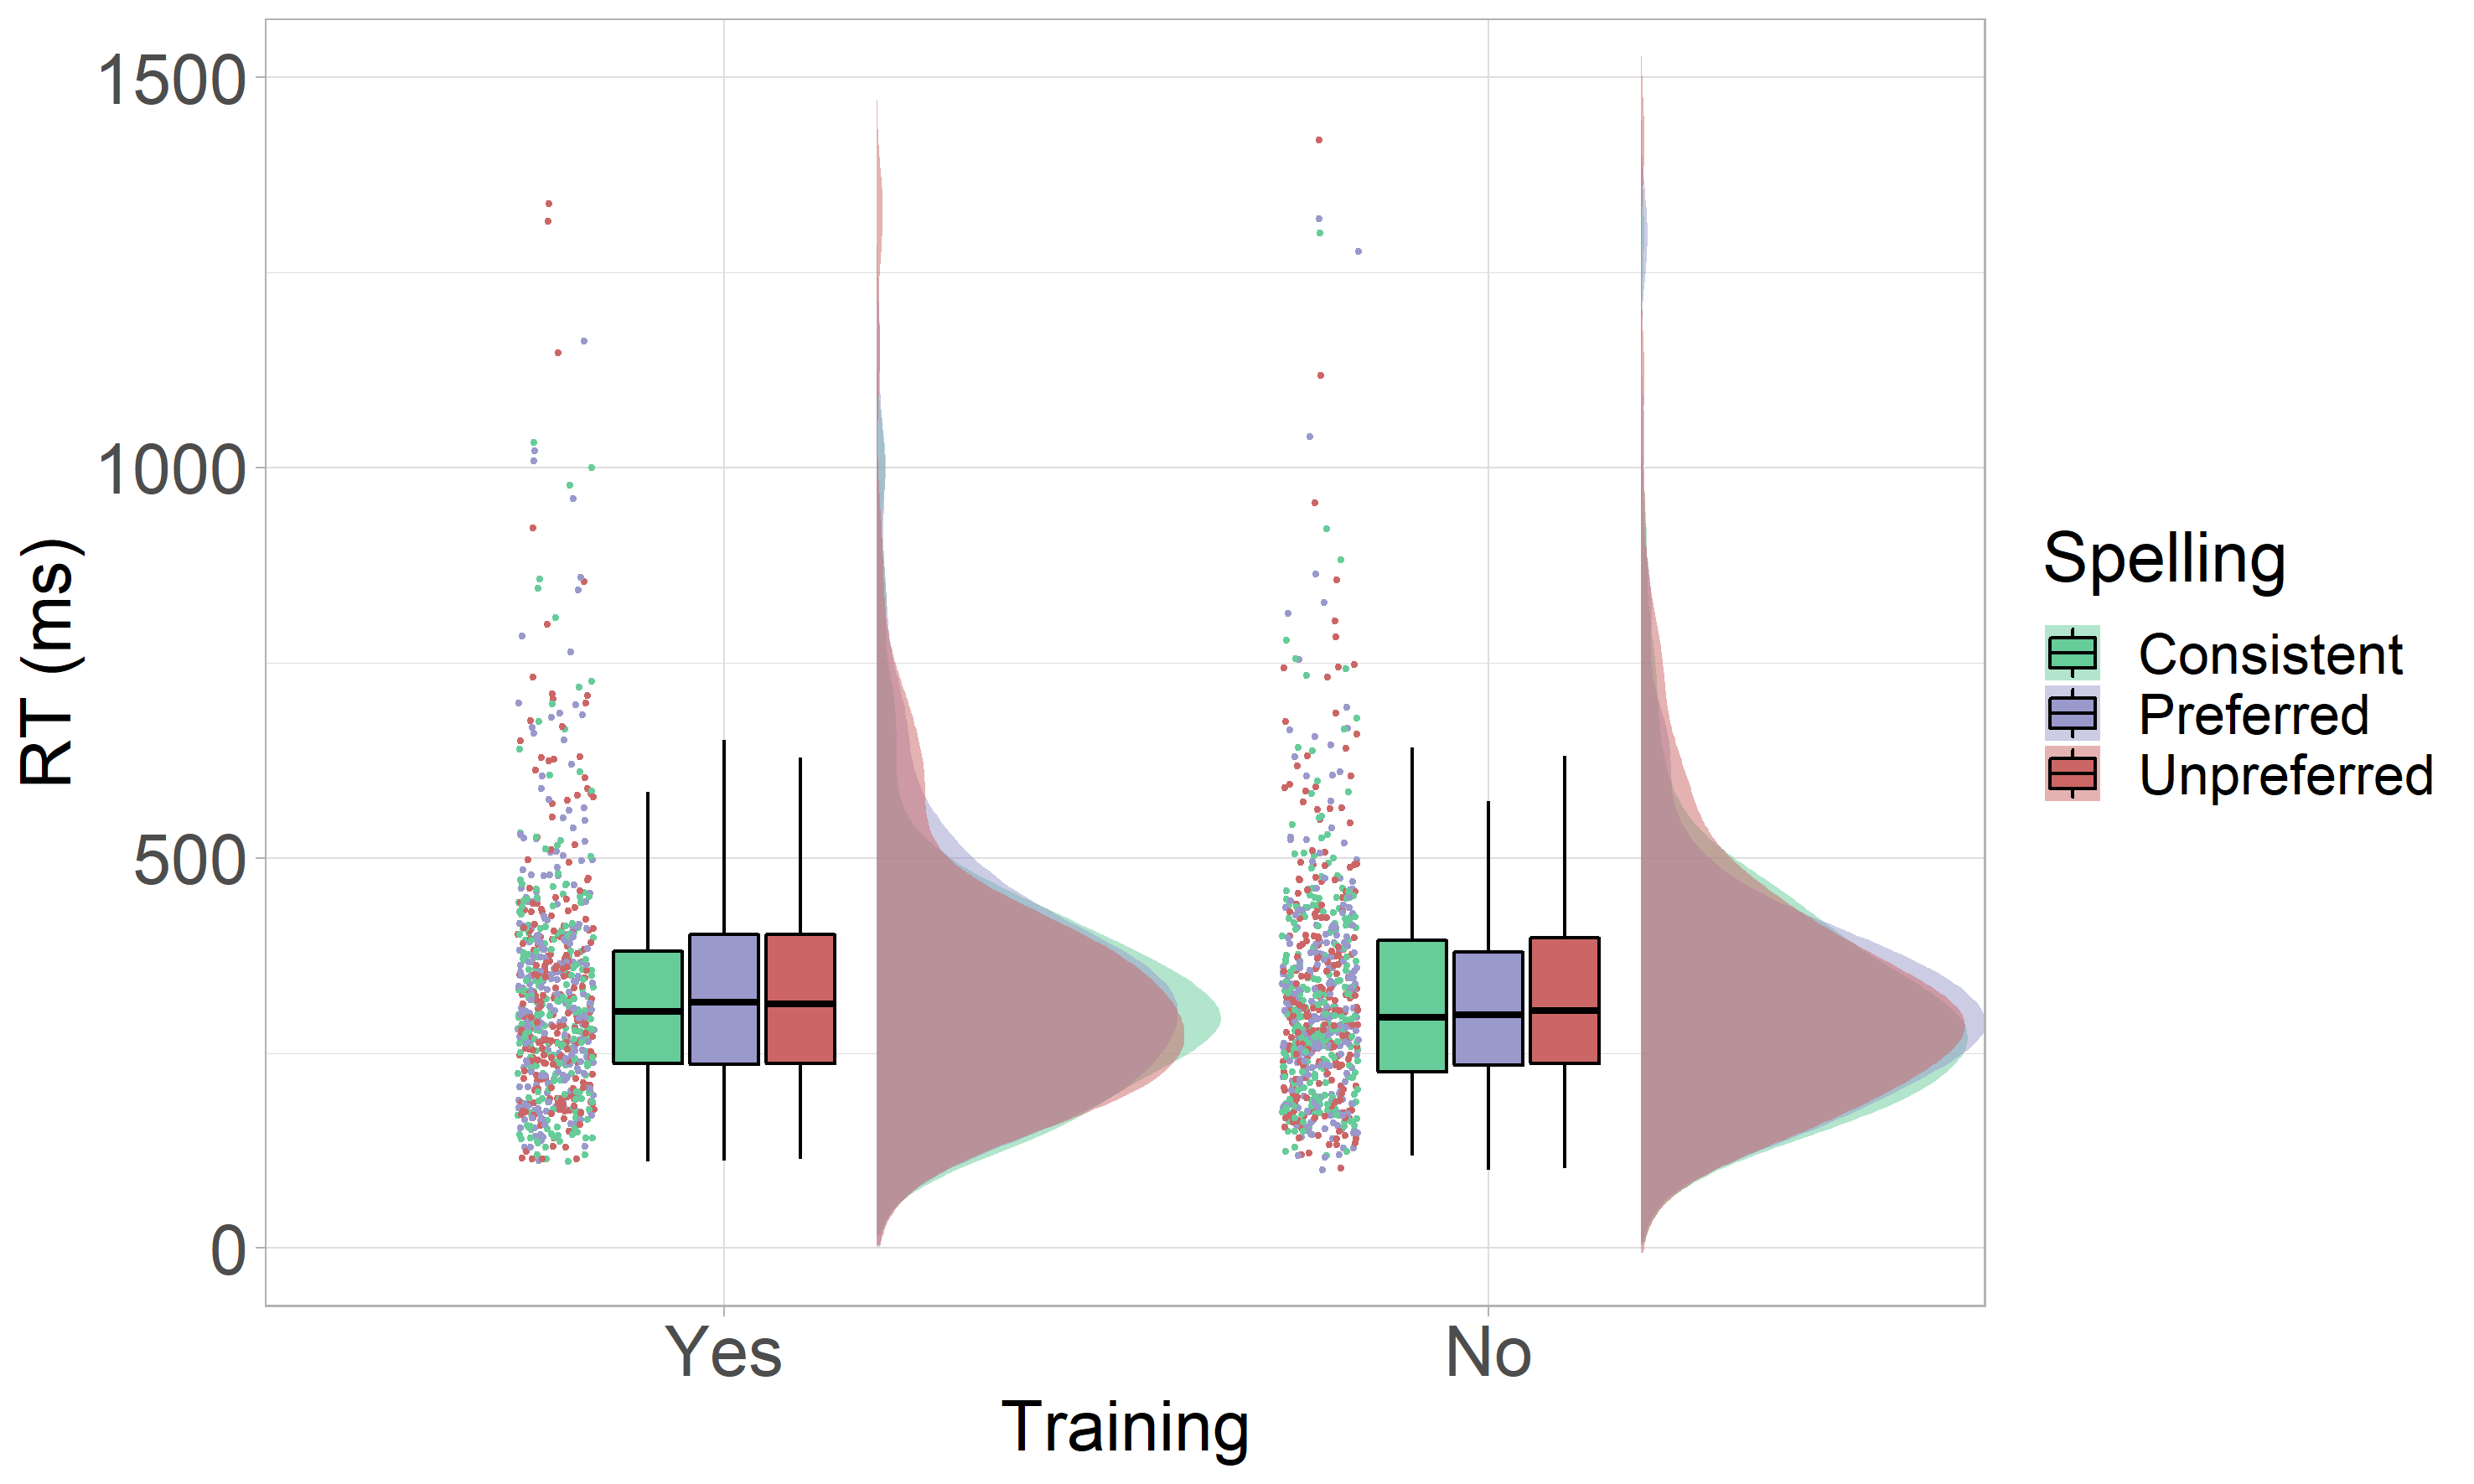 Distribution of Reaction Times From the Experiment 3. Raincloud plots showing the distribustions of RTs for both trained and untrained consistent, preferred and unpreferred spellings.